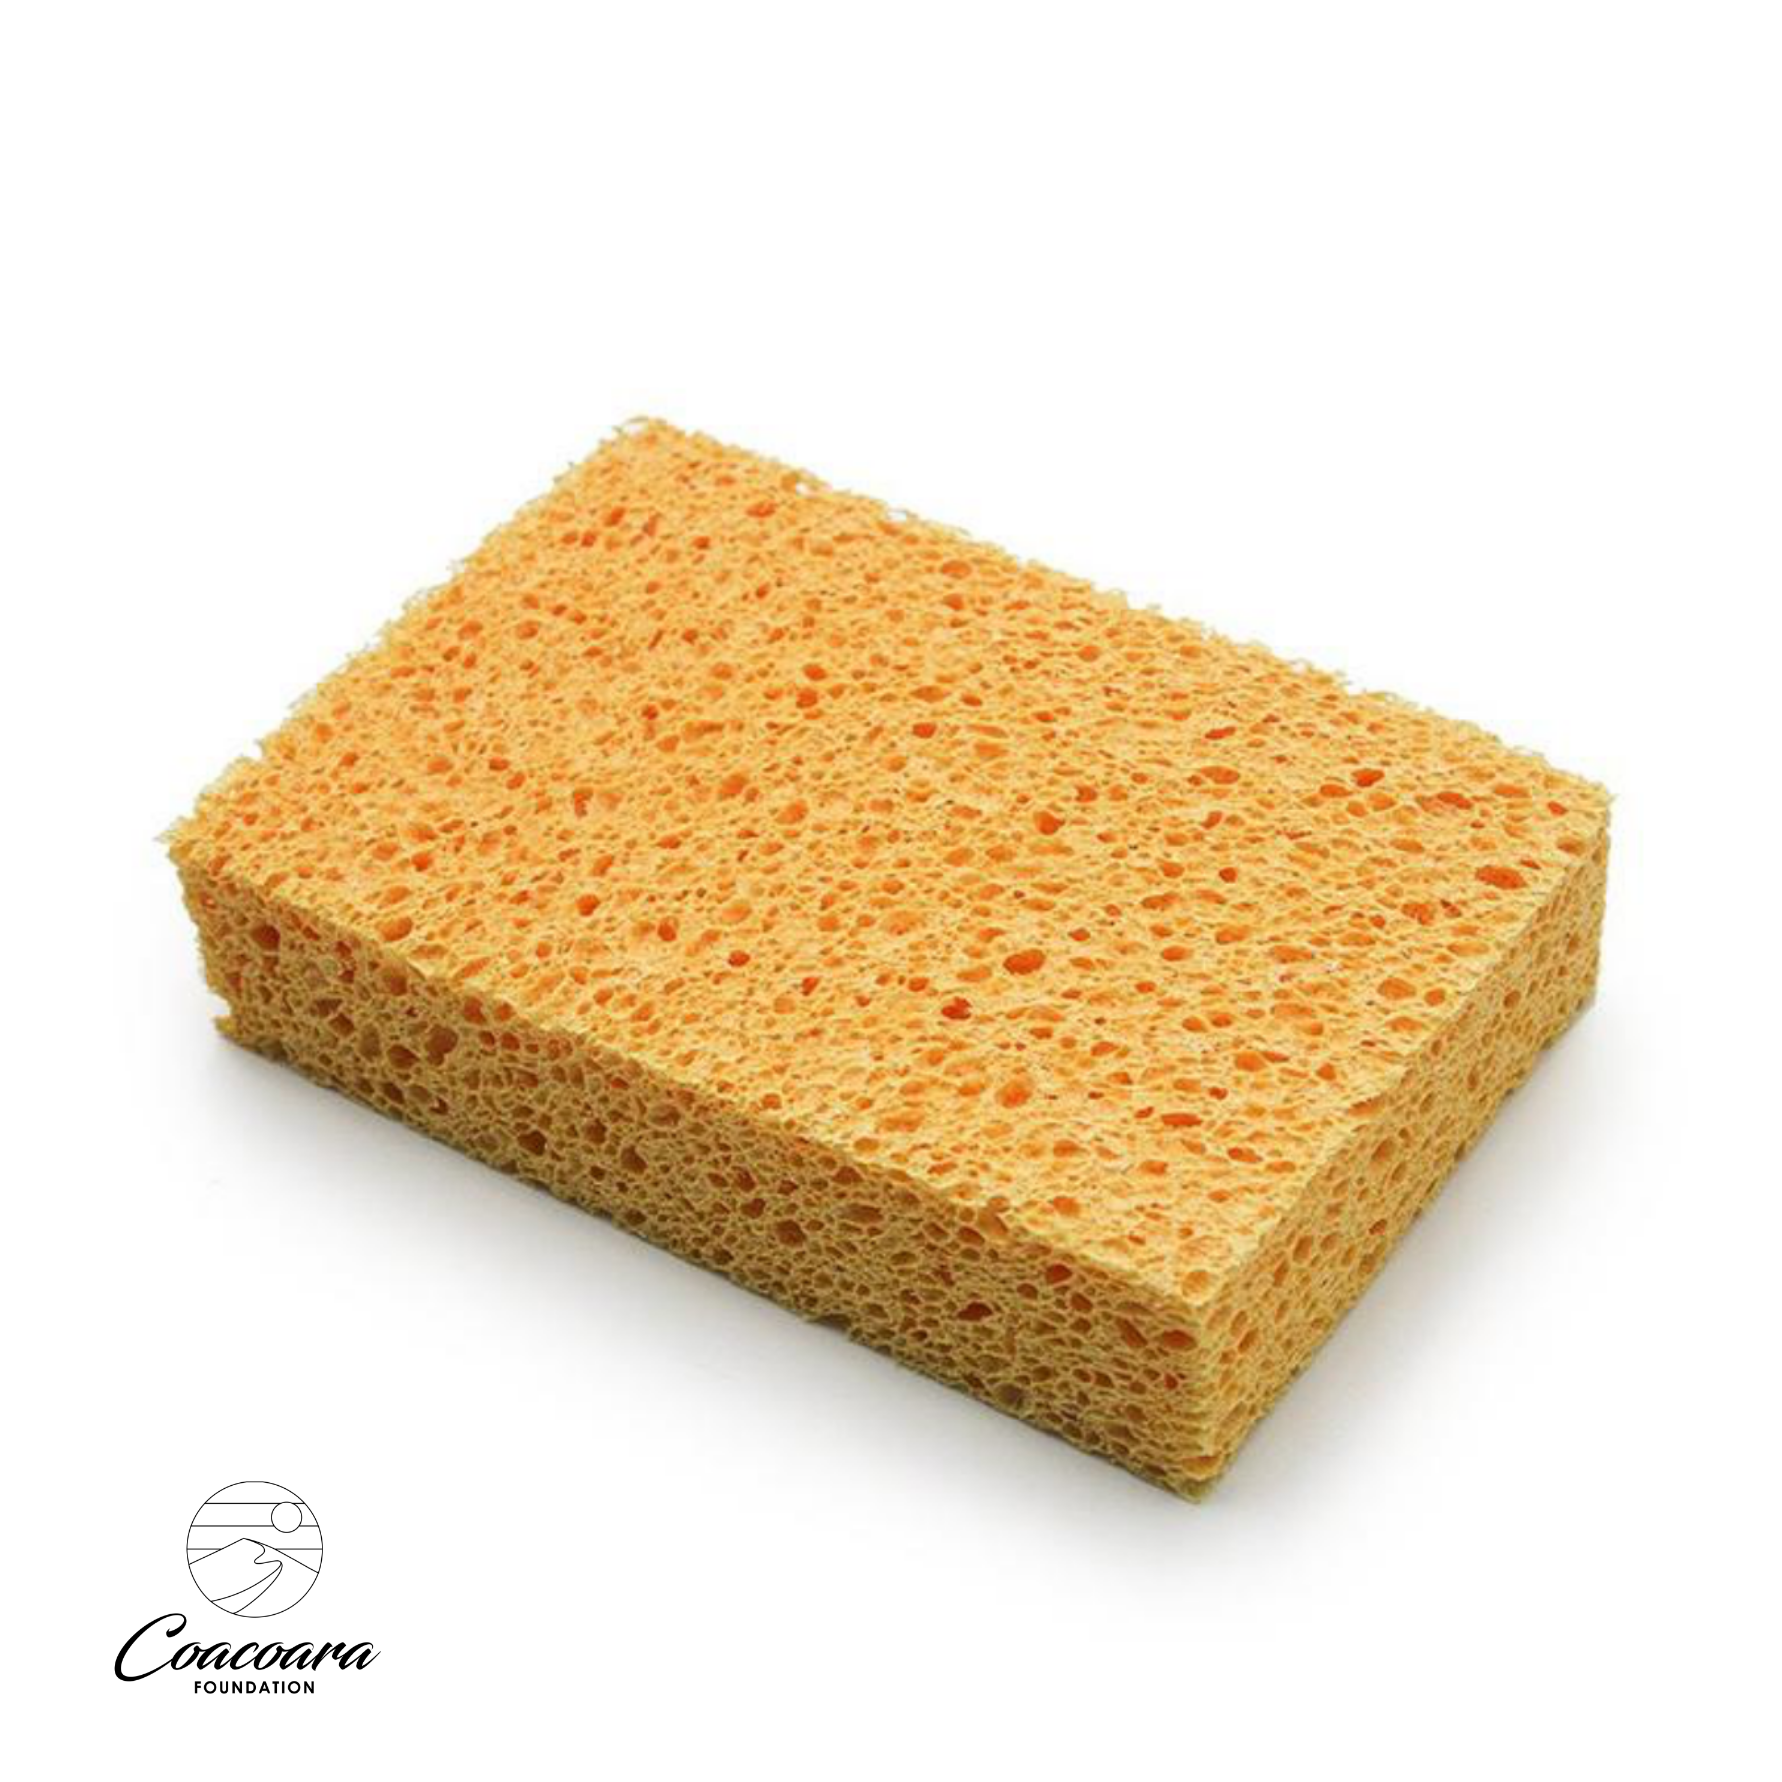 Coacoara Compostable Cellulose Sponge / sponges (1-4 pack) Perfect for use in the kitchen, bathroom and all around the house. Fully biodegradable – non-plastic! Very durable and eco-friendly Extra absorbent - up to 10x its own dry weight!&nbsp; Made from plant based cellulose 120mm (length) x 80mm (width) x 25mm (height) Renewable and sustainable Made in the UK kitchen sponge